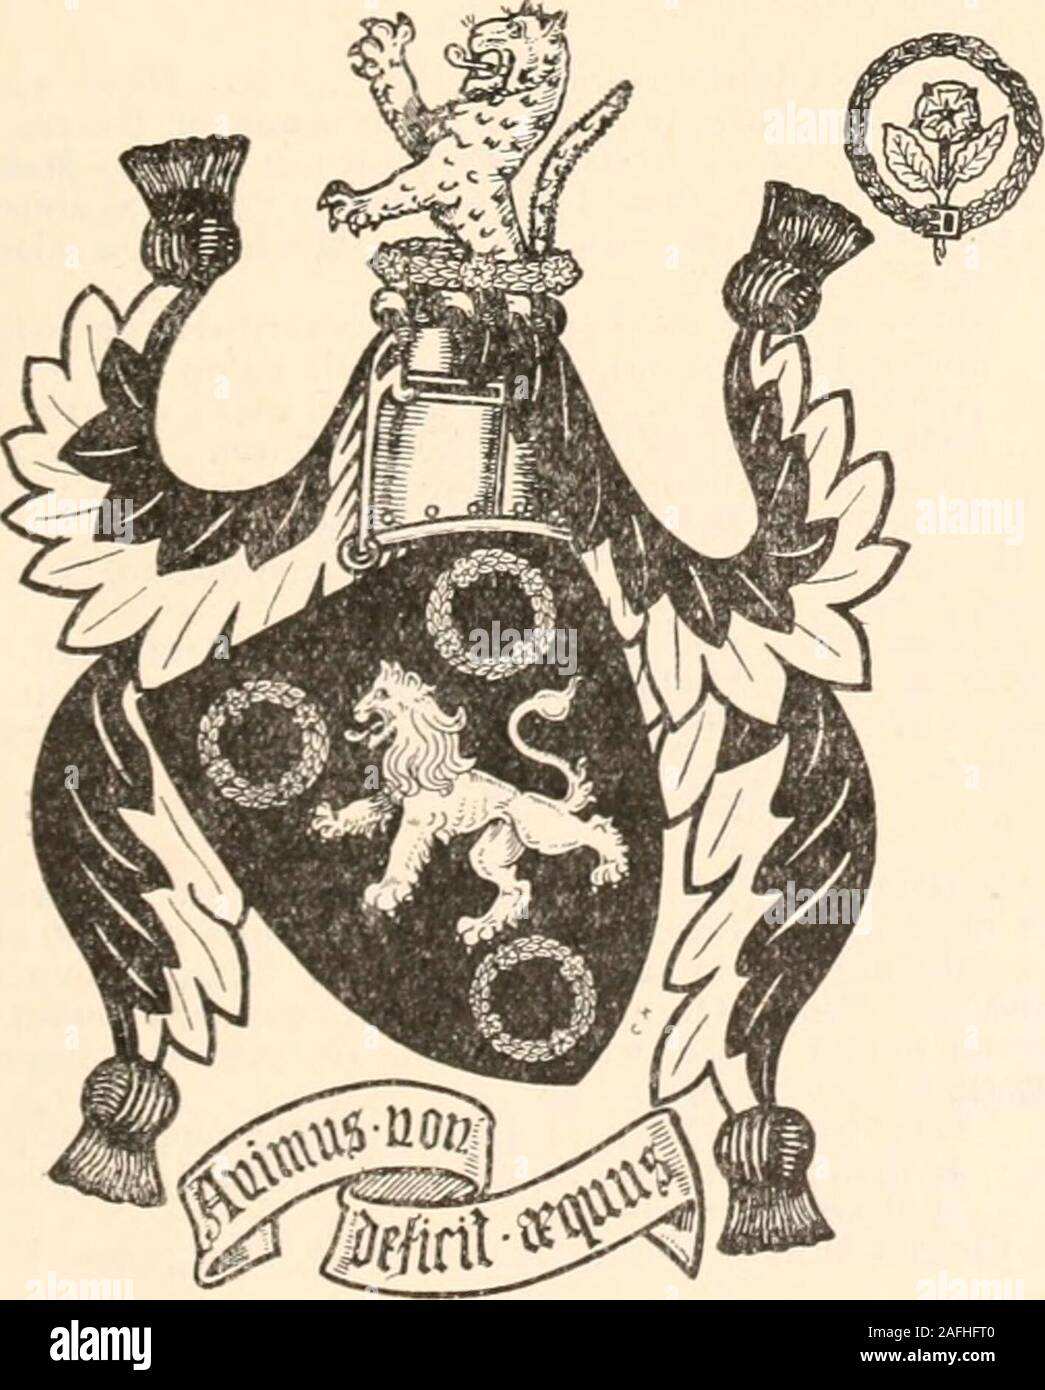 . Armorial families : a directory of gentlemen of coat-armour. illed in action 1918 [m. Rose Evelyn, d. of Capt. FrederickSandford, Gren, Gds., and left issue—Christopher RichardSandfordBuckle, Gentleman,ft. 1916]; DorisEden[OT. 1921,J. H. Woodgerof University Coll., London]; Phyllis Norton[m. 1919, Rev. Eric Graham]; Judith St. John ; and MarySybil Christian. J?es.—Beechwood, lifley, Oxford.r BUCKLE, formerly of Chaceley (H. Coll., 10 Feb.1916). Sable, a lion rampant or between three chapletsof roses argent. Mantling sable and or. Crest—On awreath of the colours, issuant out of a chaplet of r Stock Photo